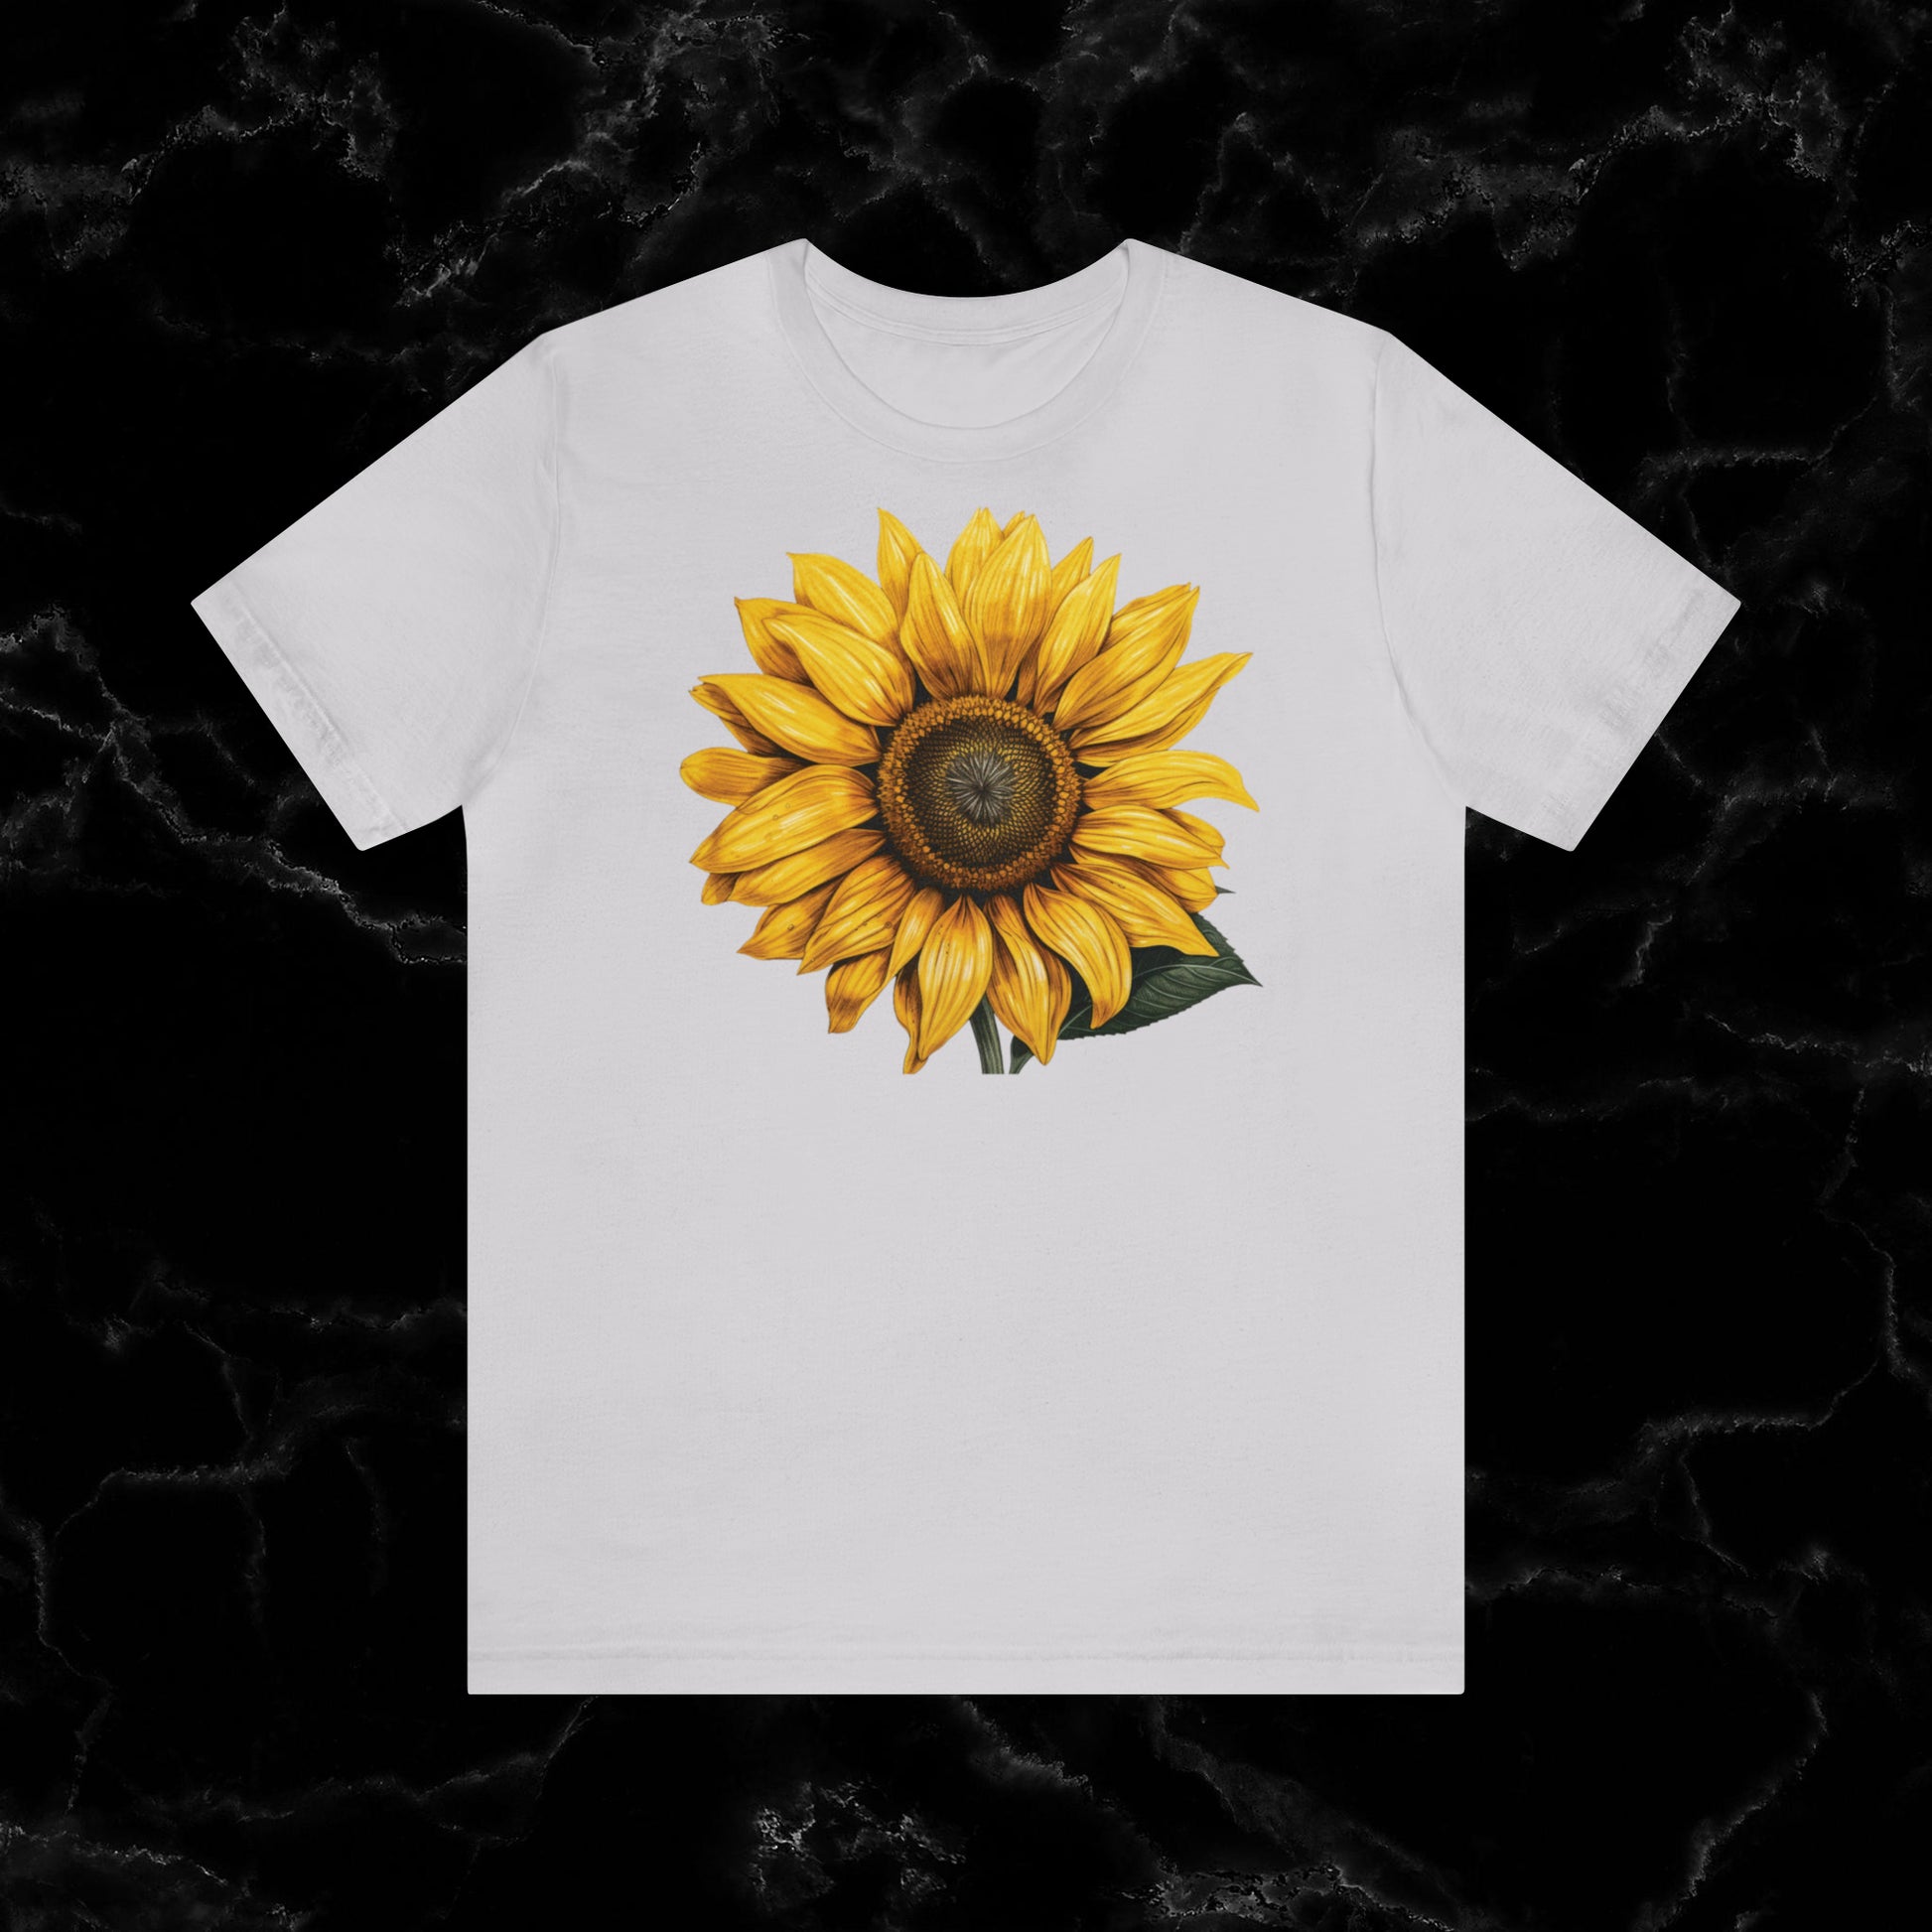 Sunflower Shirt Collection - Floral Tee, Garden Shirt, and Women's Fall Fashion Staples T-Shirt Lavender Dust S 